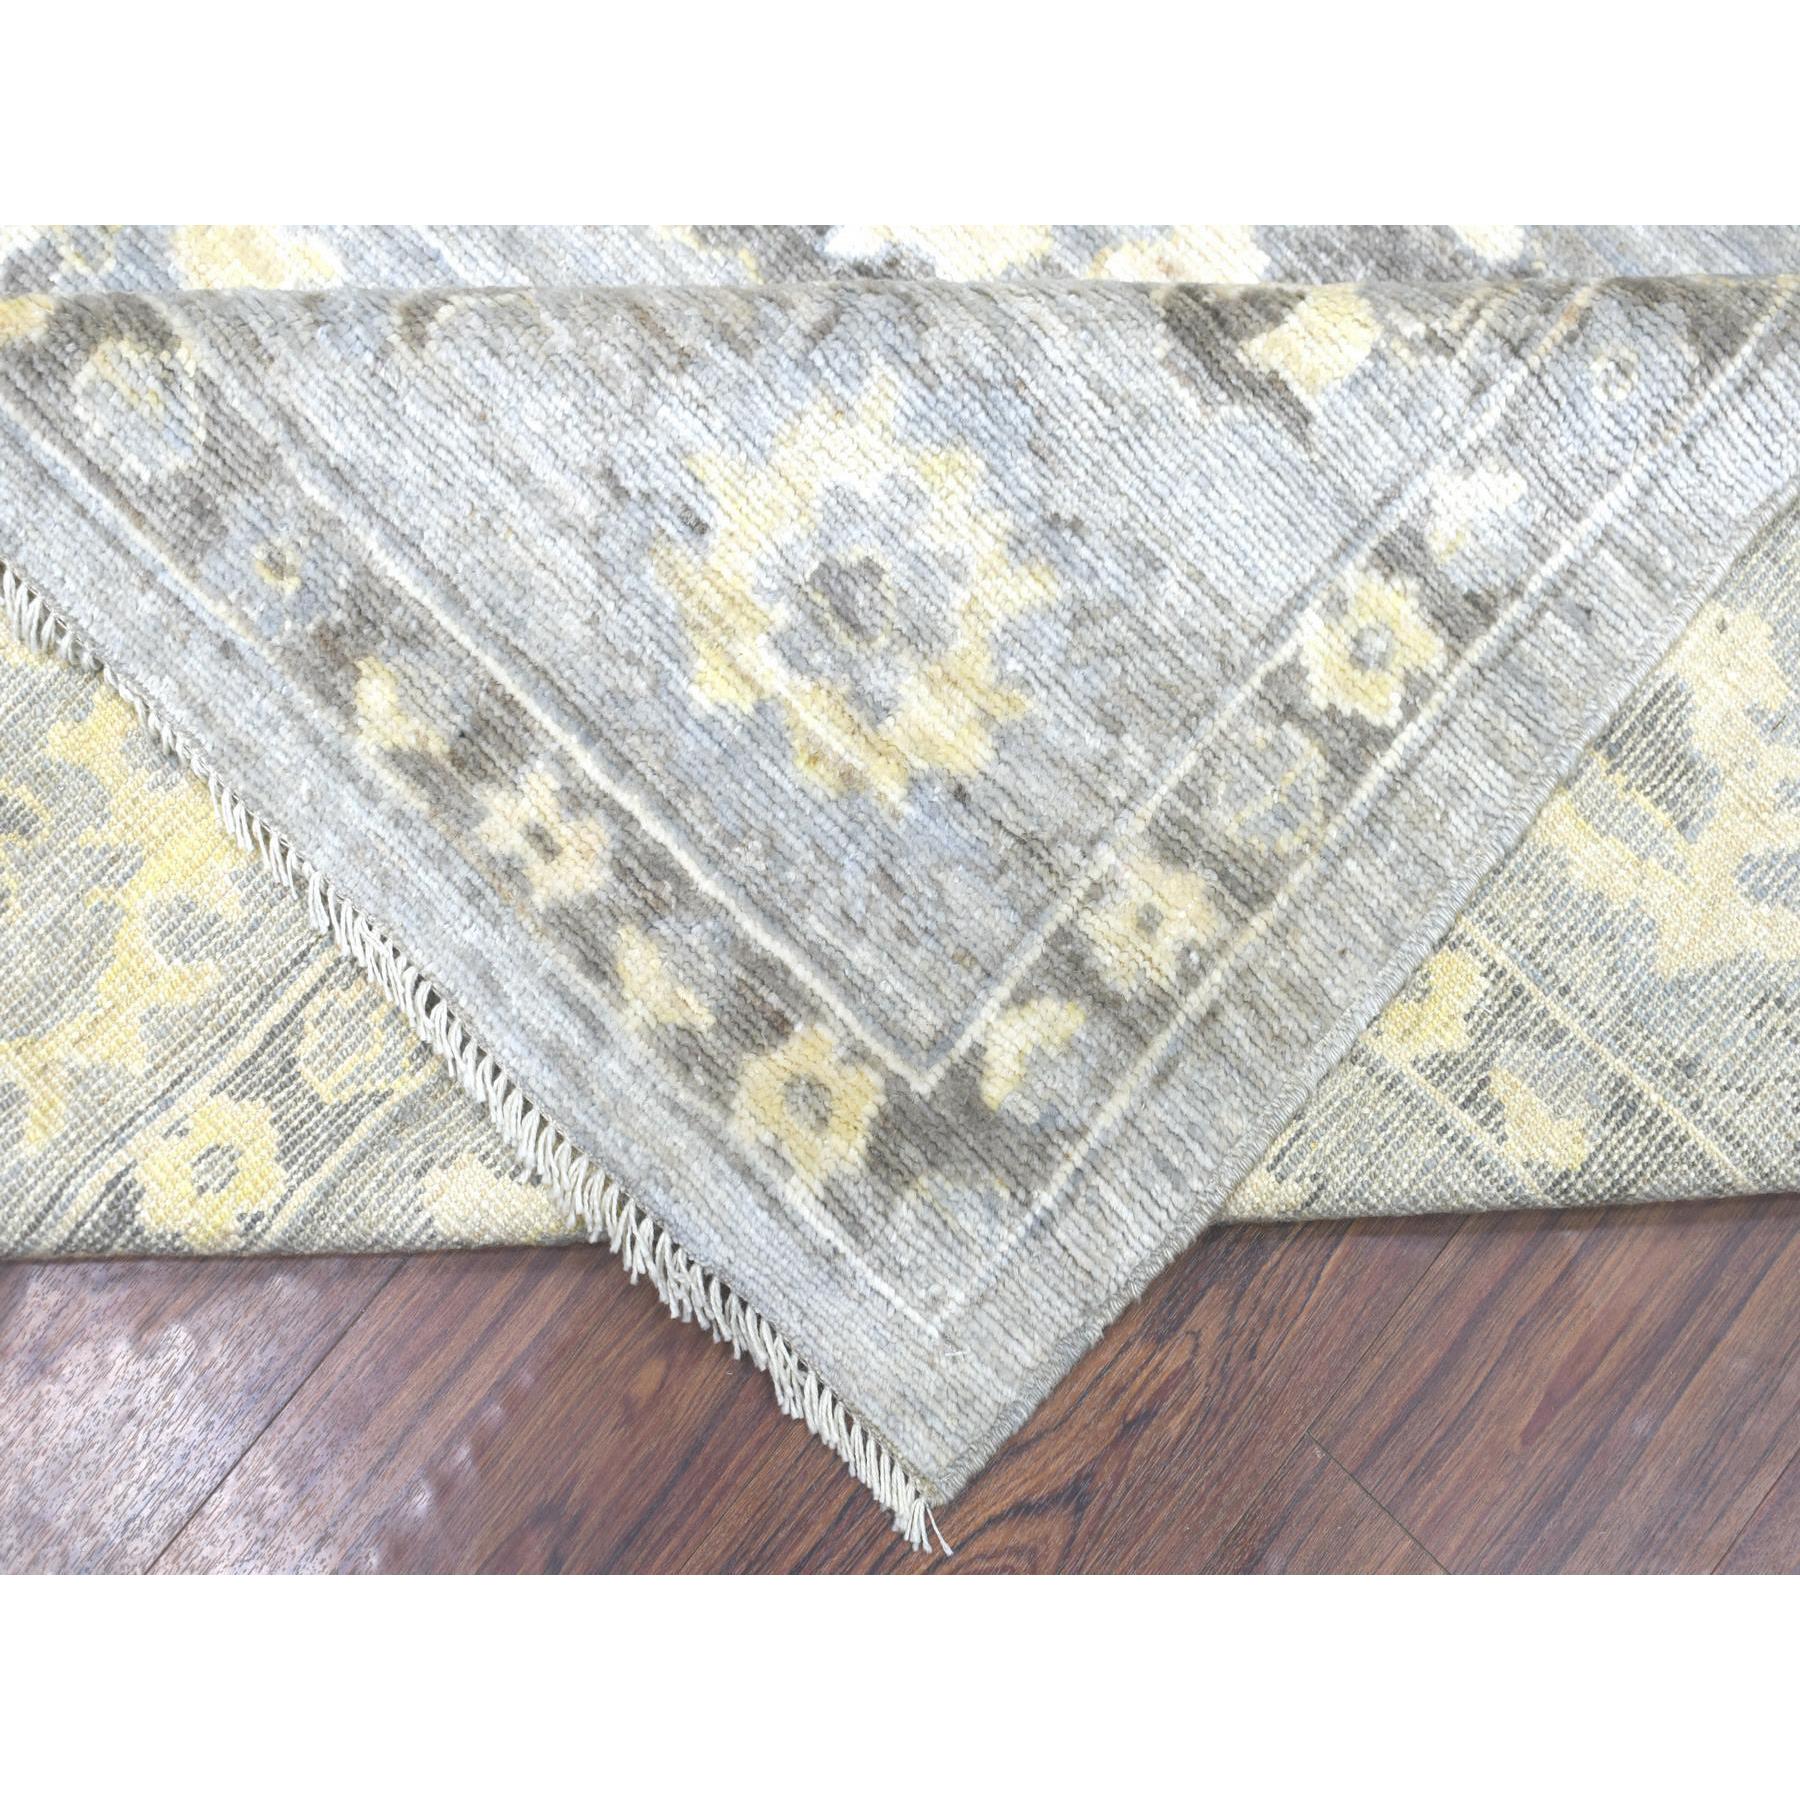 8'x9'10" Hand Woven Gray Afghan Angora Ushak With Floral Eye Catching Pattern Soft Wool Oriental Rug 